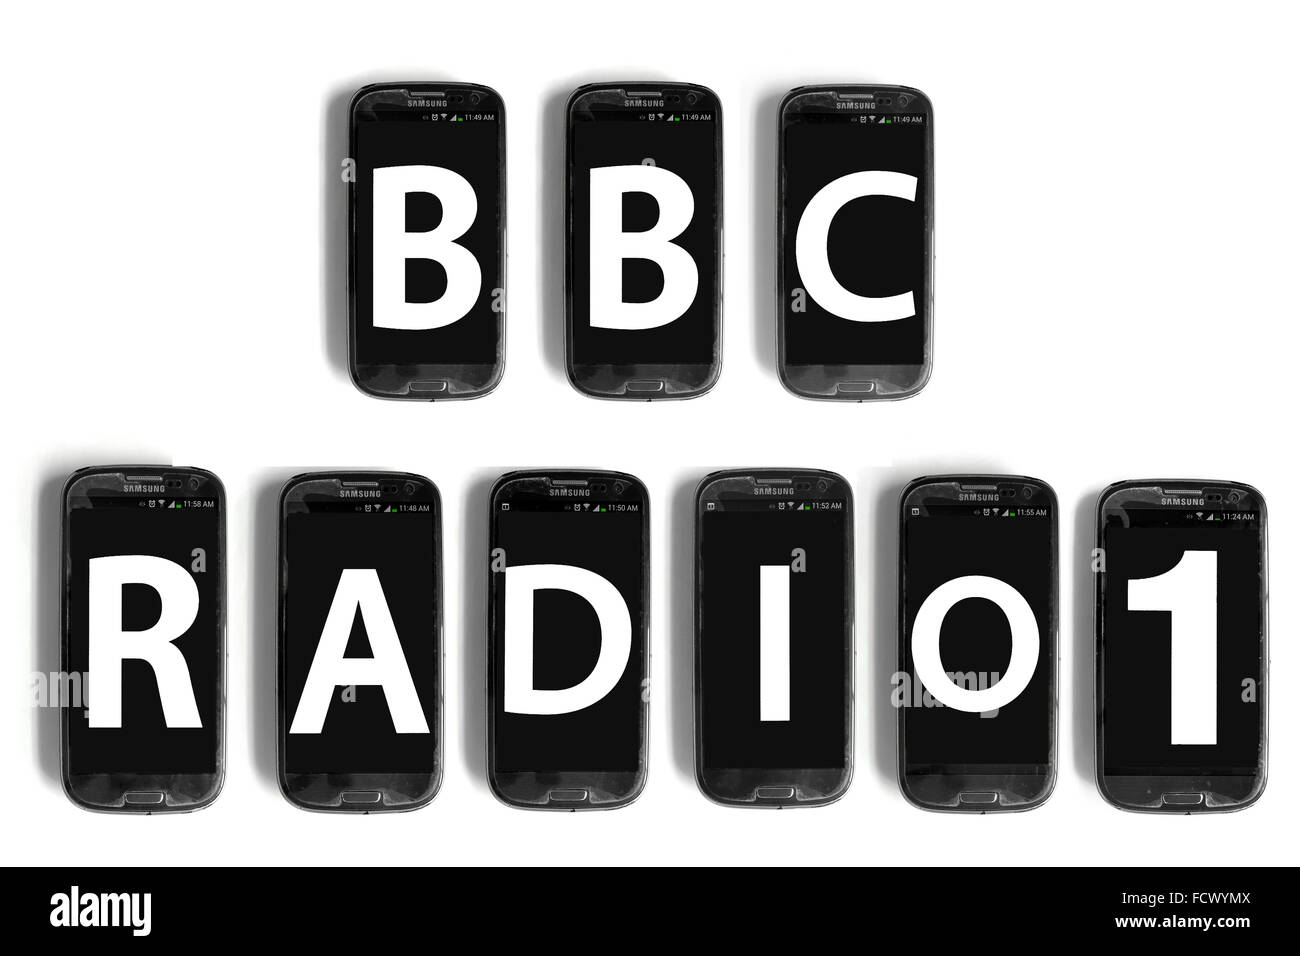 BBC Radio1 written on the screens of smartphone photographed against a white background. Stock Photo